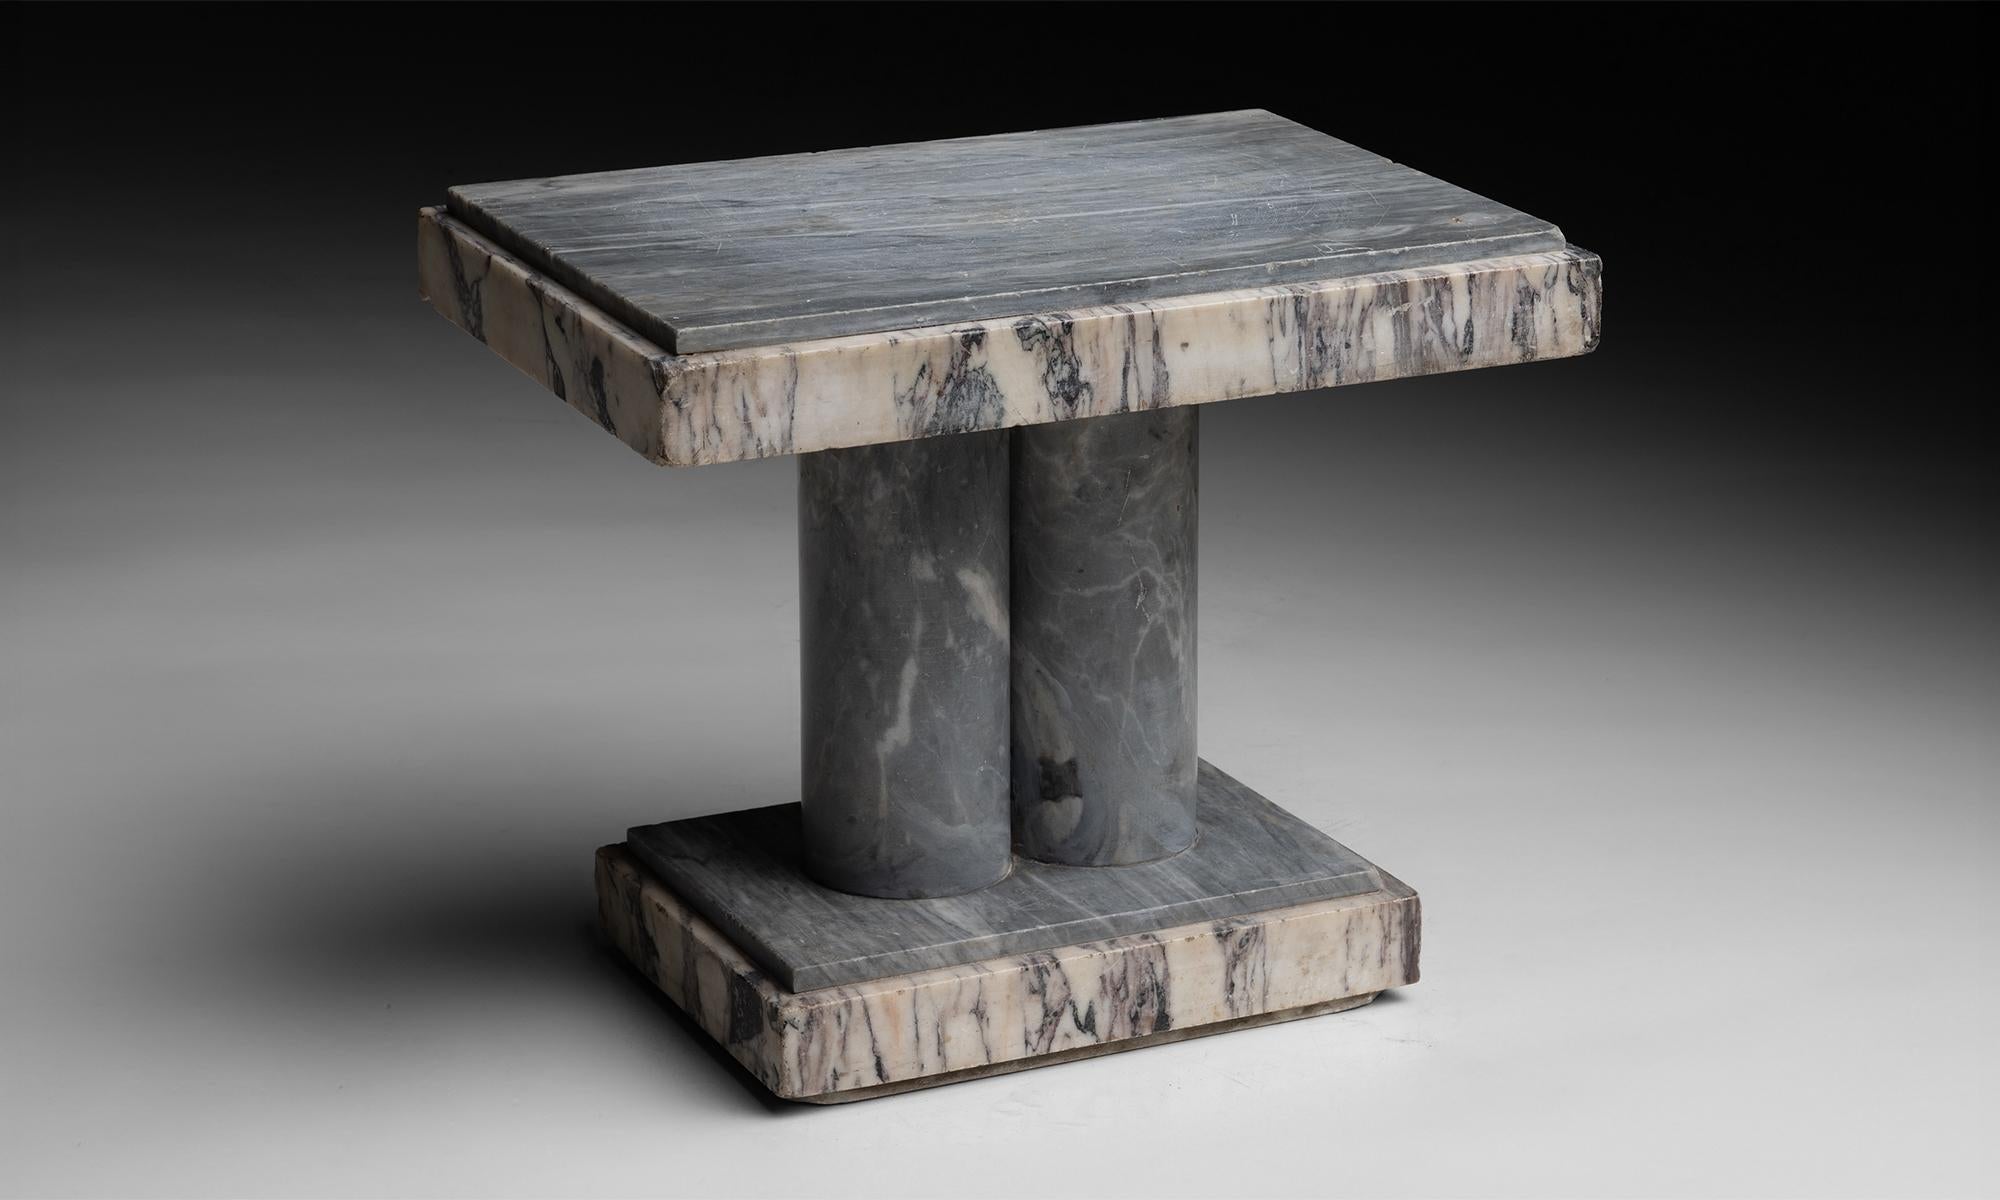 Marble Pedestal
France circa 1950
solid marble construction, with cylindrical base. Made from two different species.
16.25”L x 11.25”d x 13.25”h